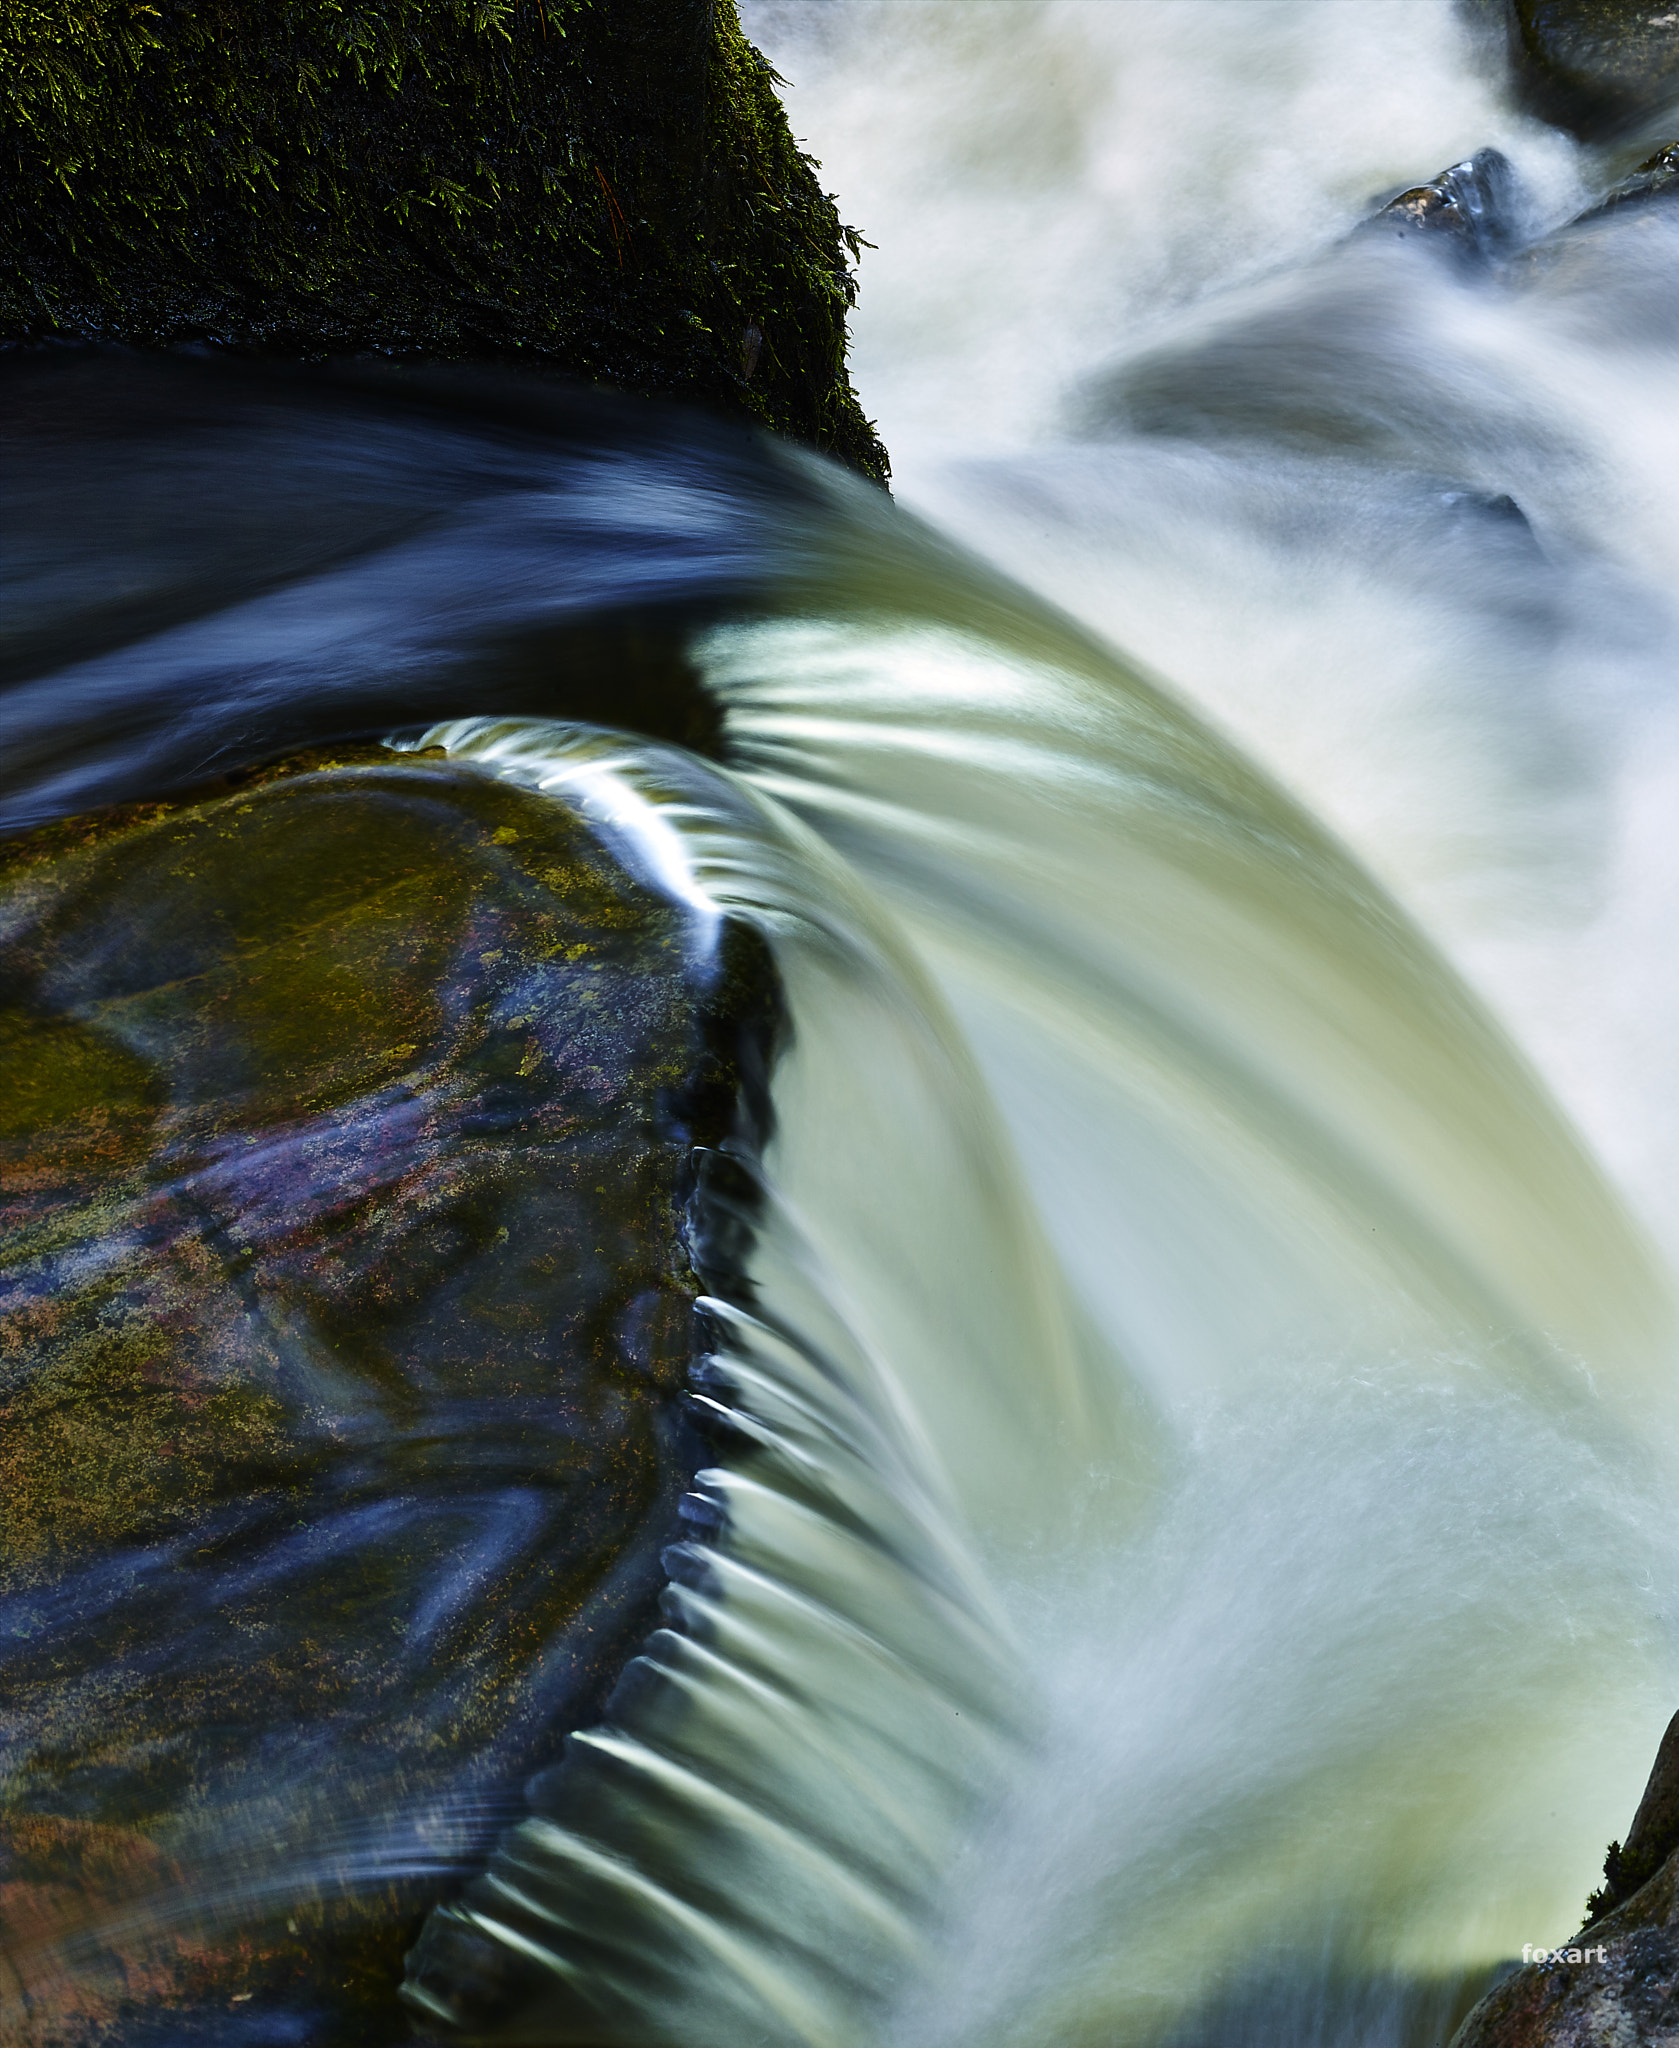 Phase One P40+ sample photo. Water force photography